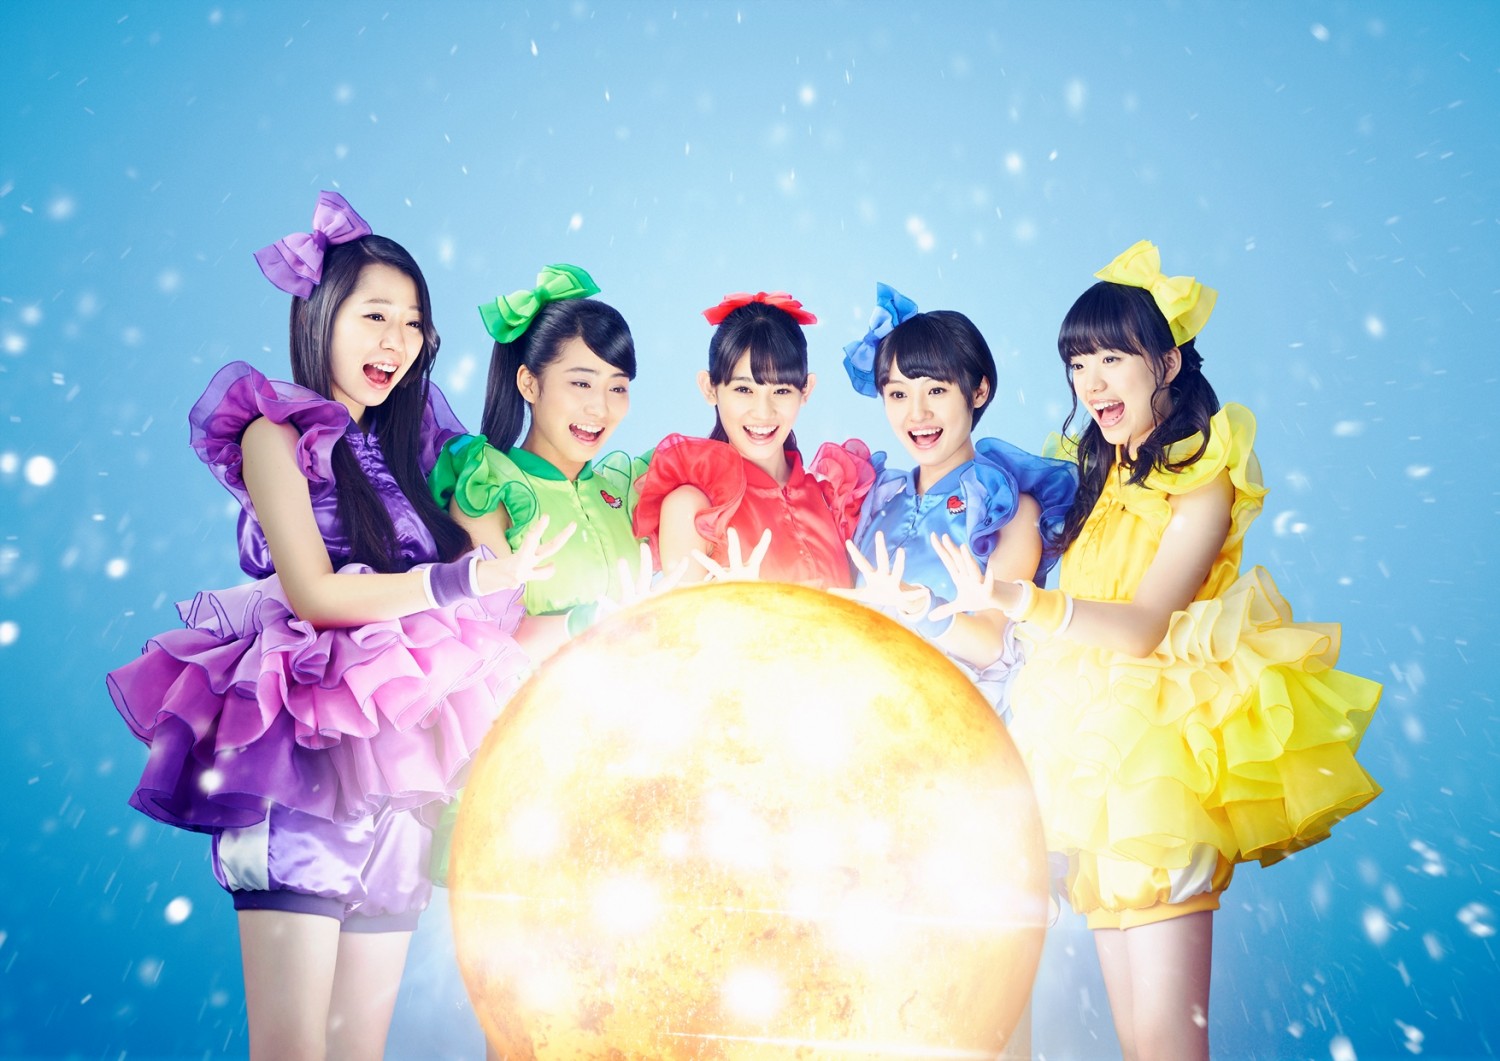 Team Syachihoko Battle Mystical Forces in the MV for “ULTRA Cho MIRACLE SUPER VERY POWER BALL”!!!